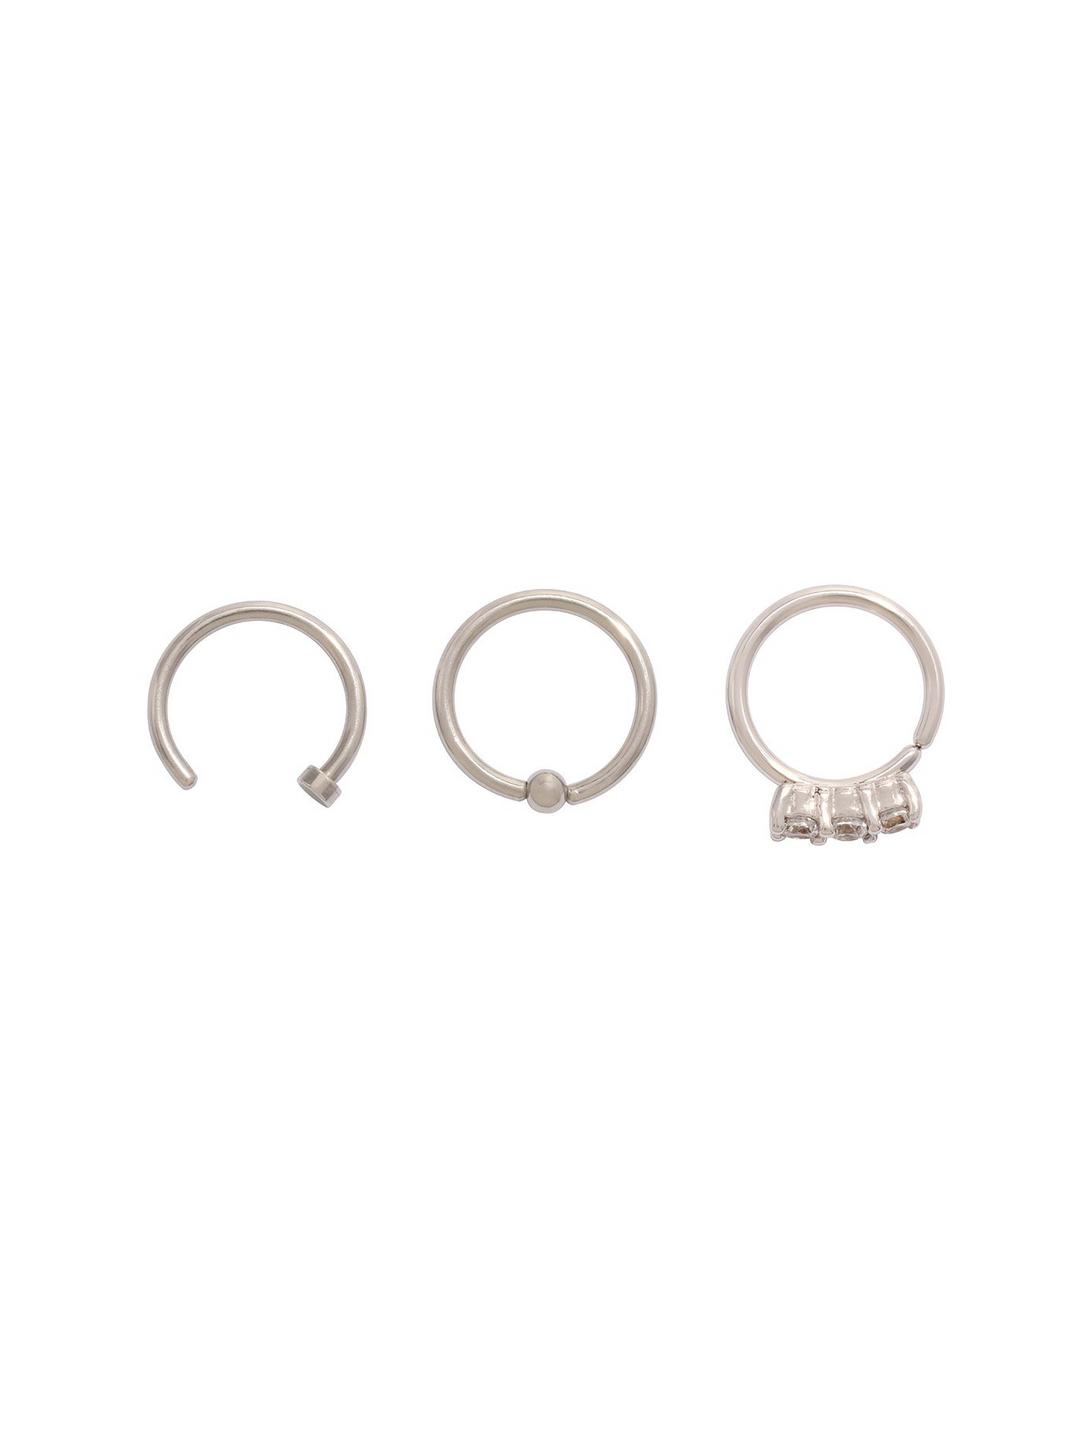 Steel Silver Nose Hoops CZ Prong 3 Pack, SILVER, hi-res